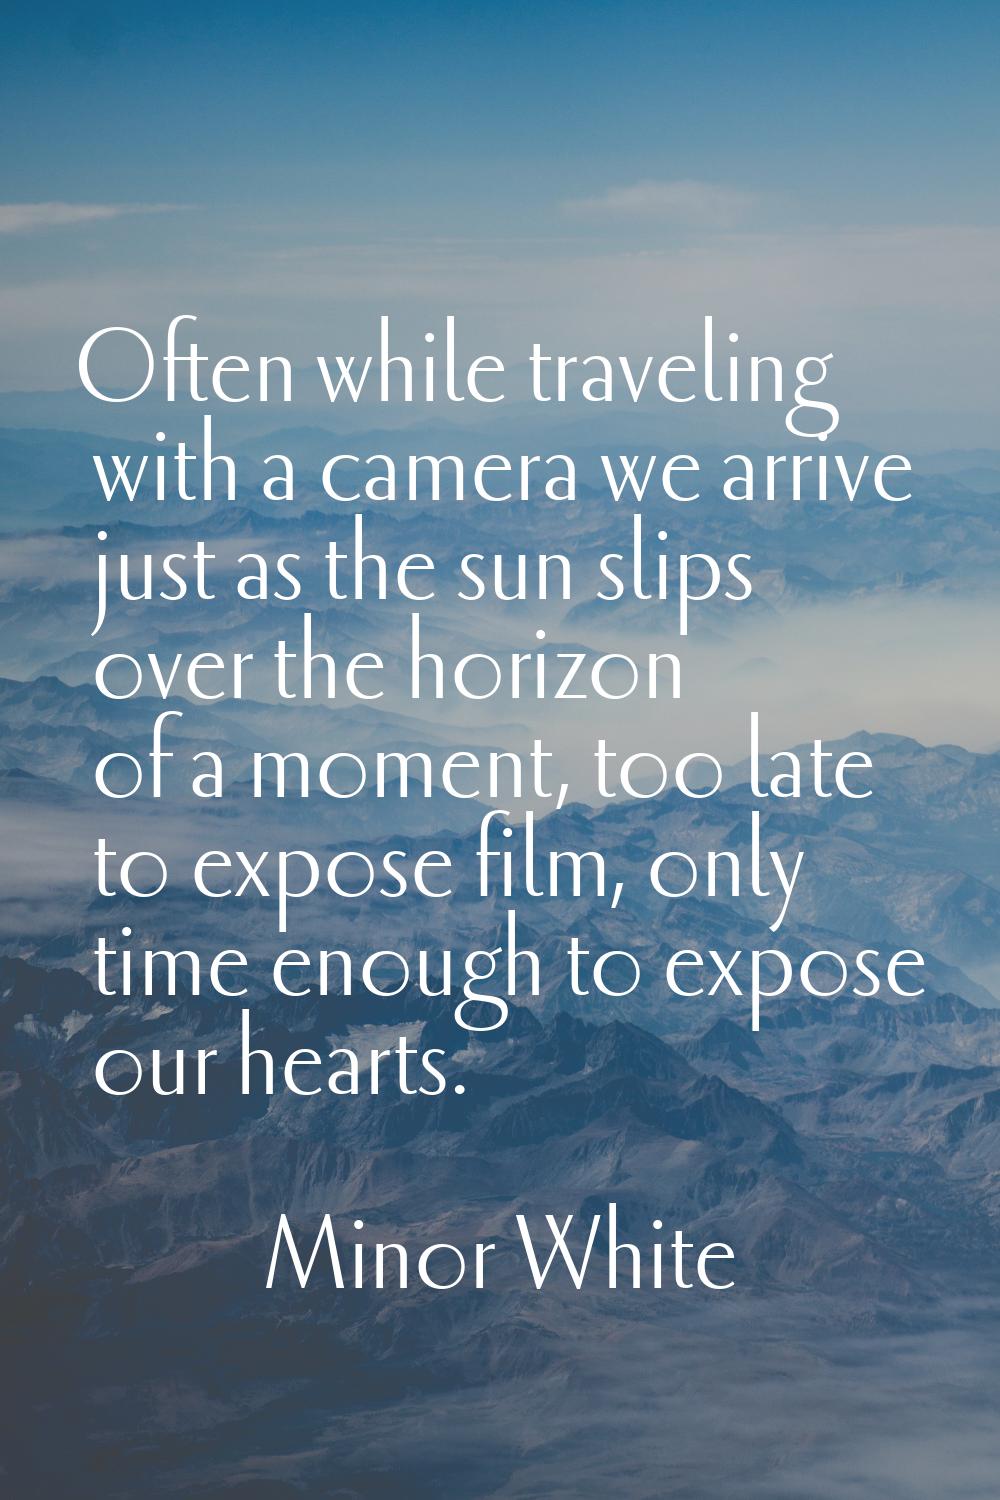 Often while traveling with a camera we arrive just as the sun slips over the horizon of a moment, t